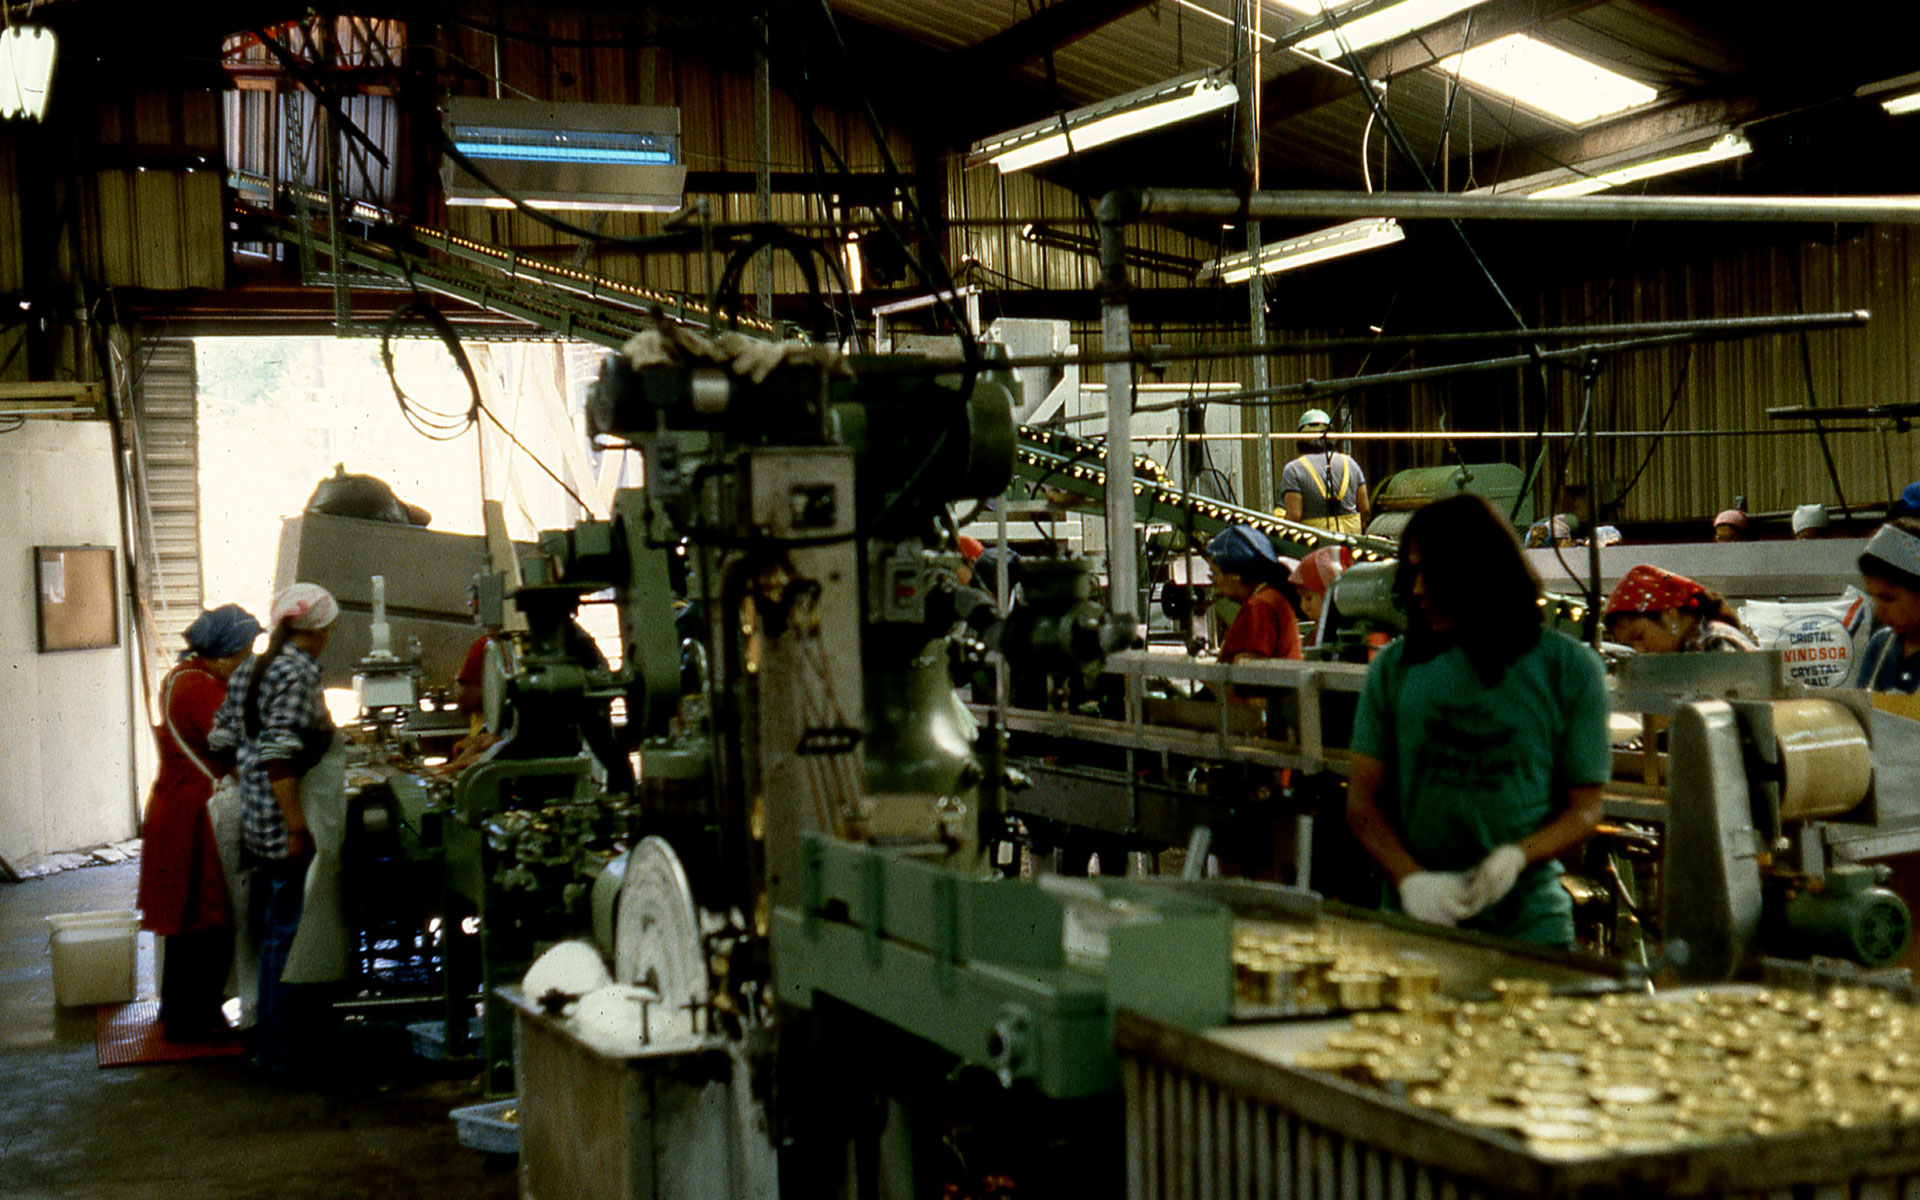 Interior of a modern, mechanized canning line with several workers at different stations.